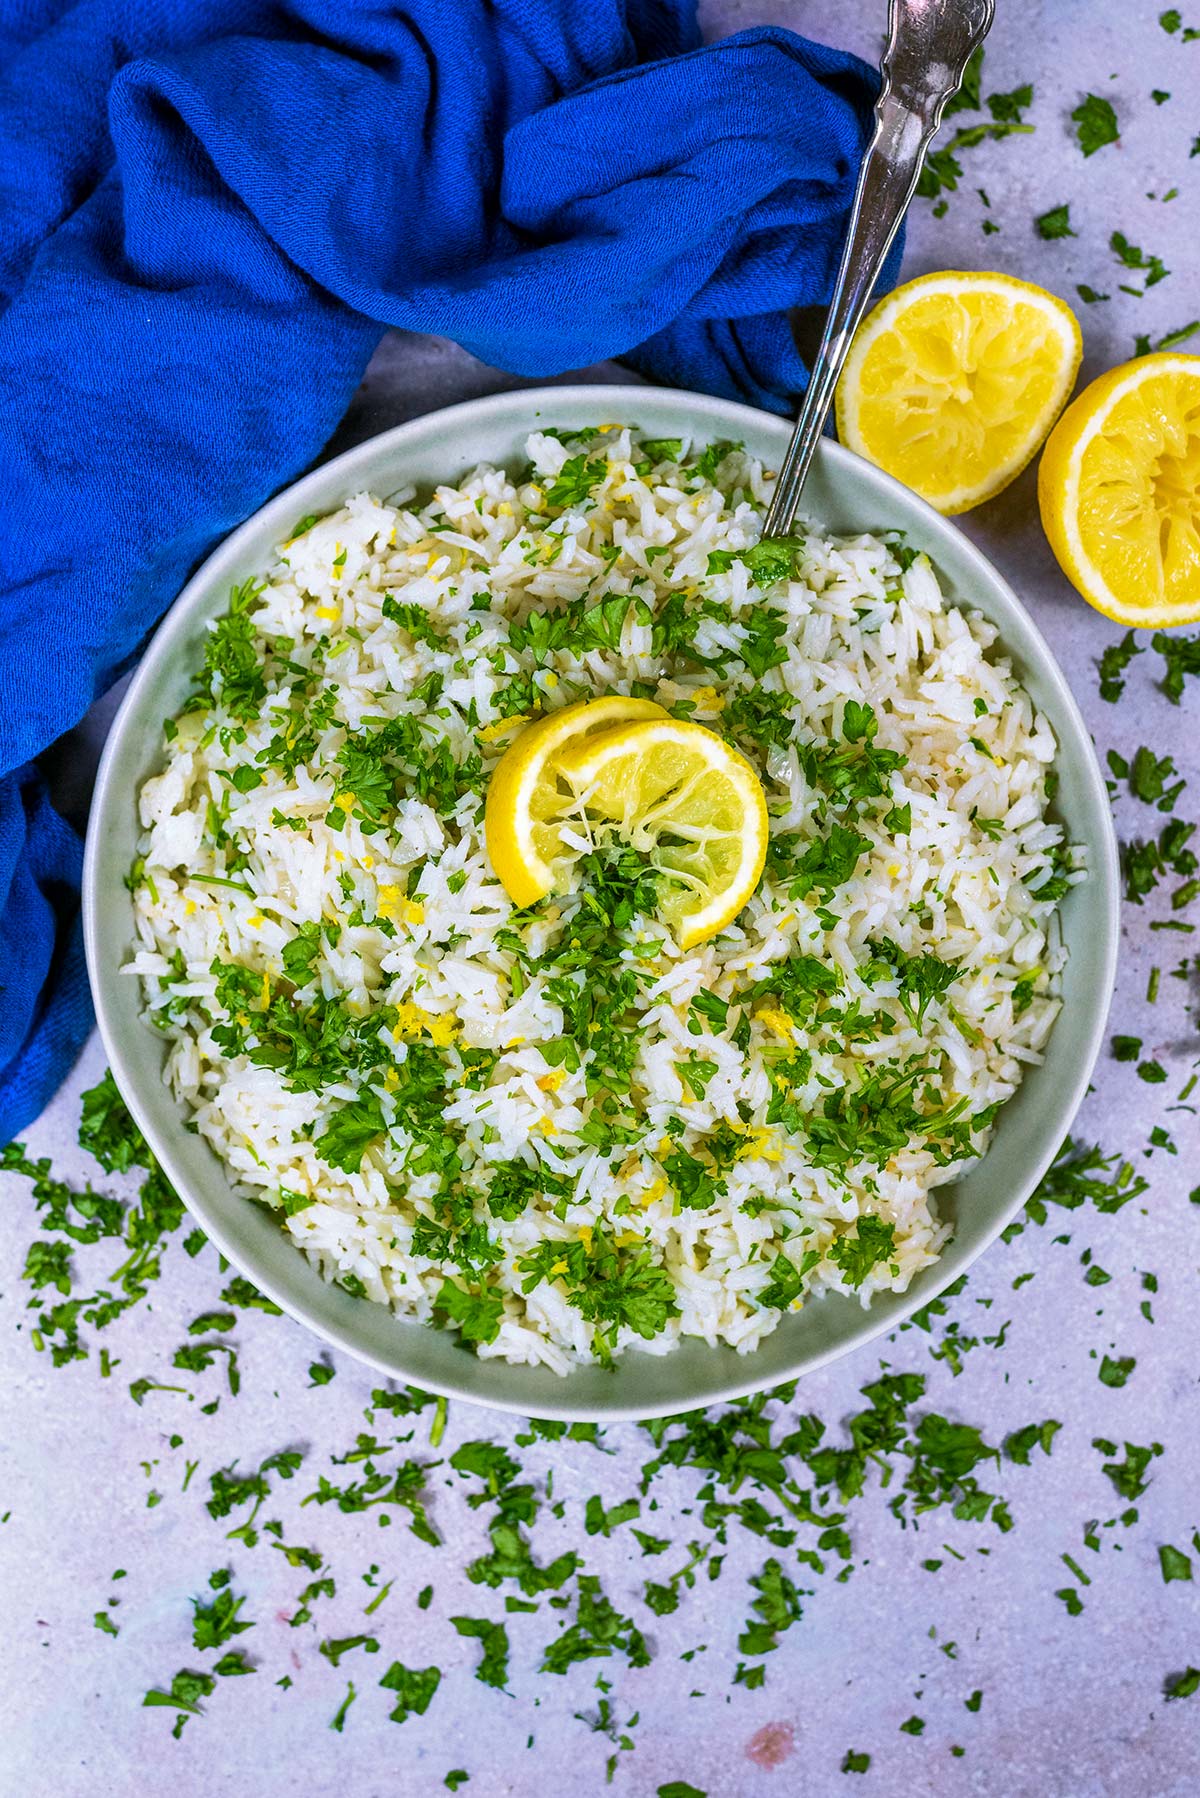 A large bowl of cooked rice, topped with chopped herbs and slices of lemon.